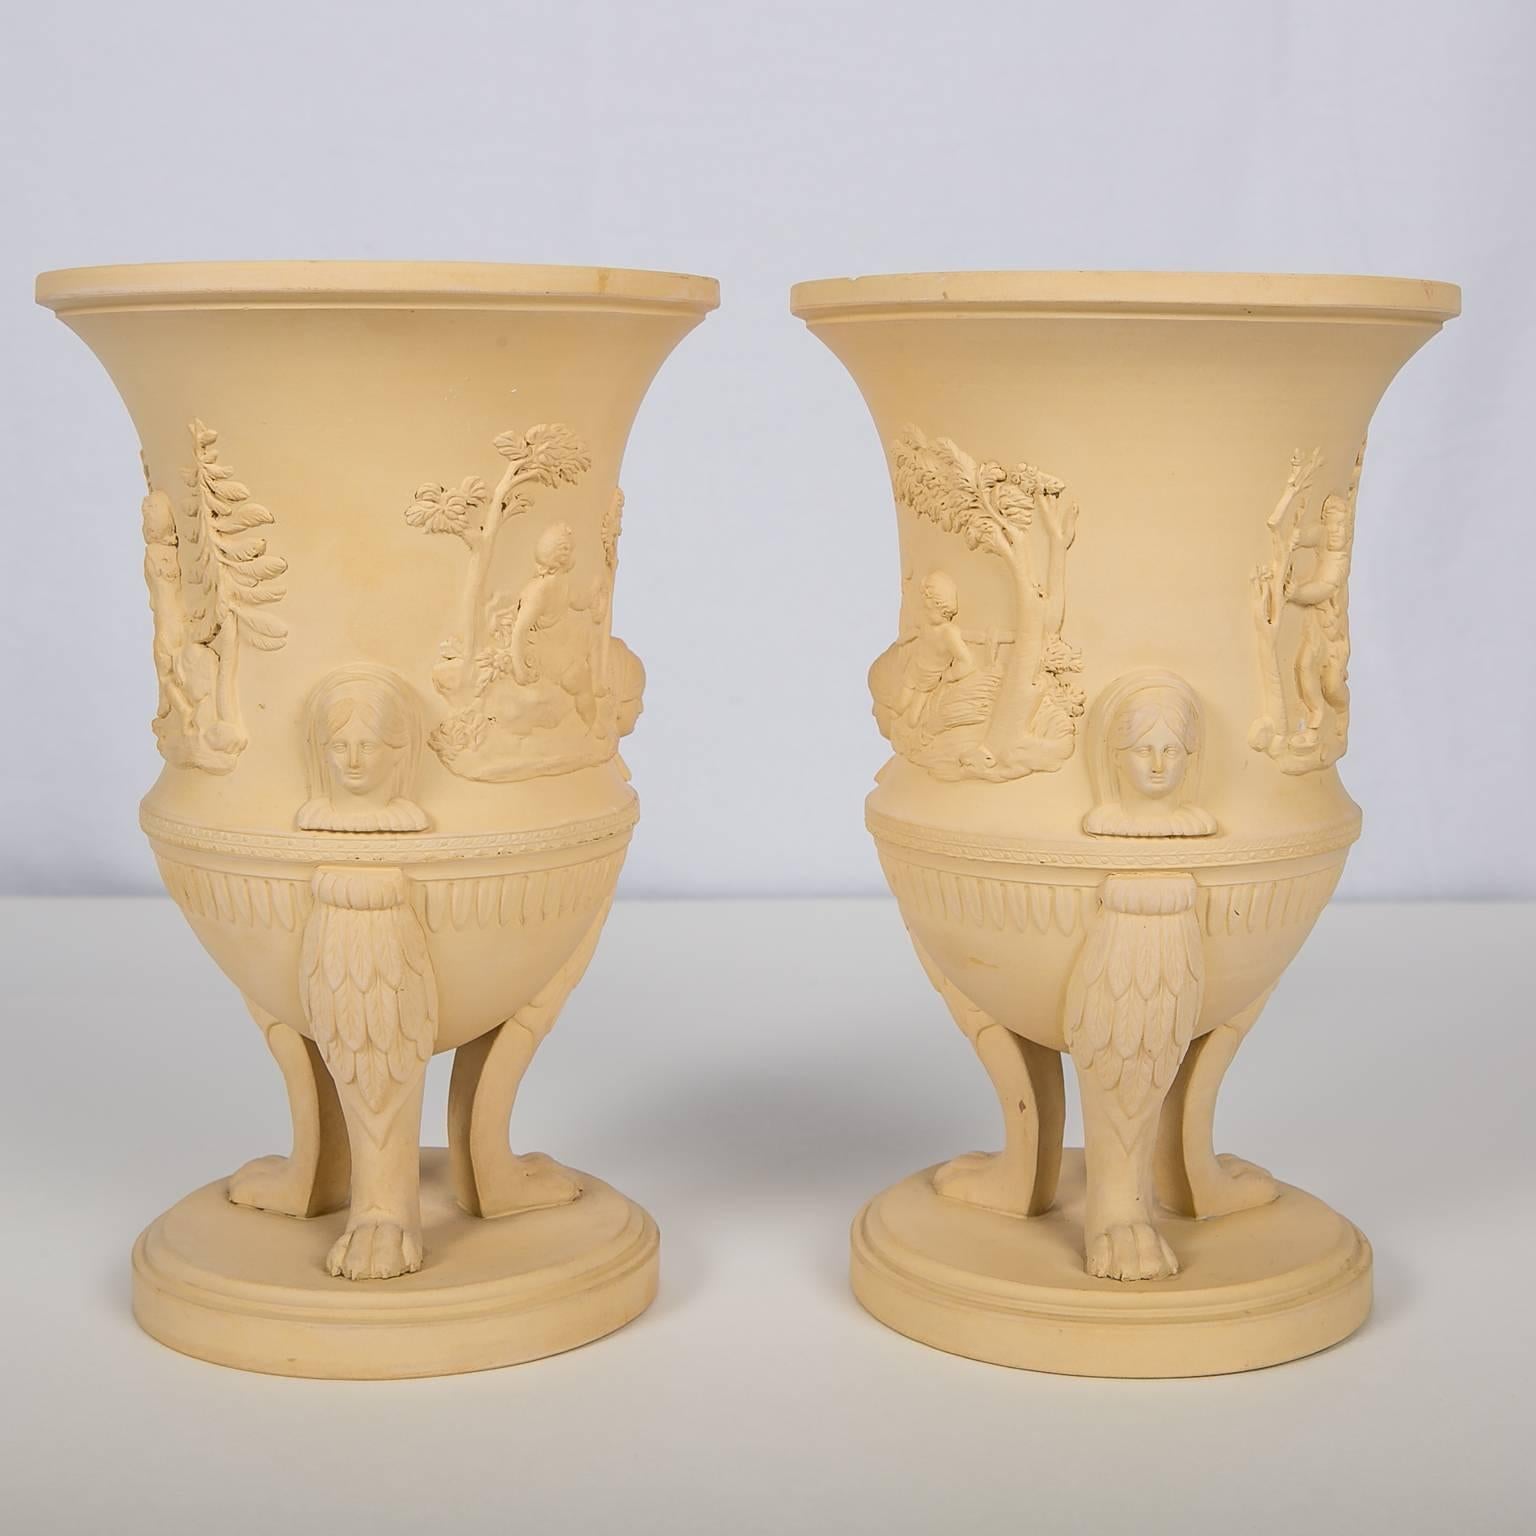 Pair of Neoclassical Vases the Color of Cane Sugar Made circa 1780-1800 4